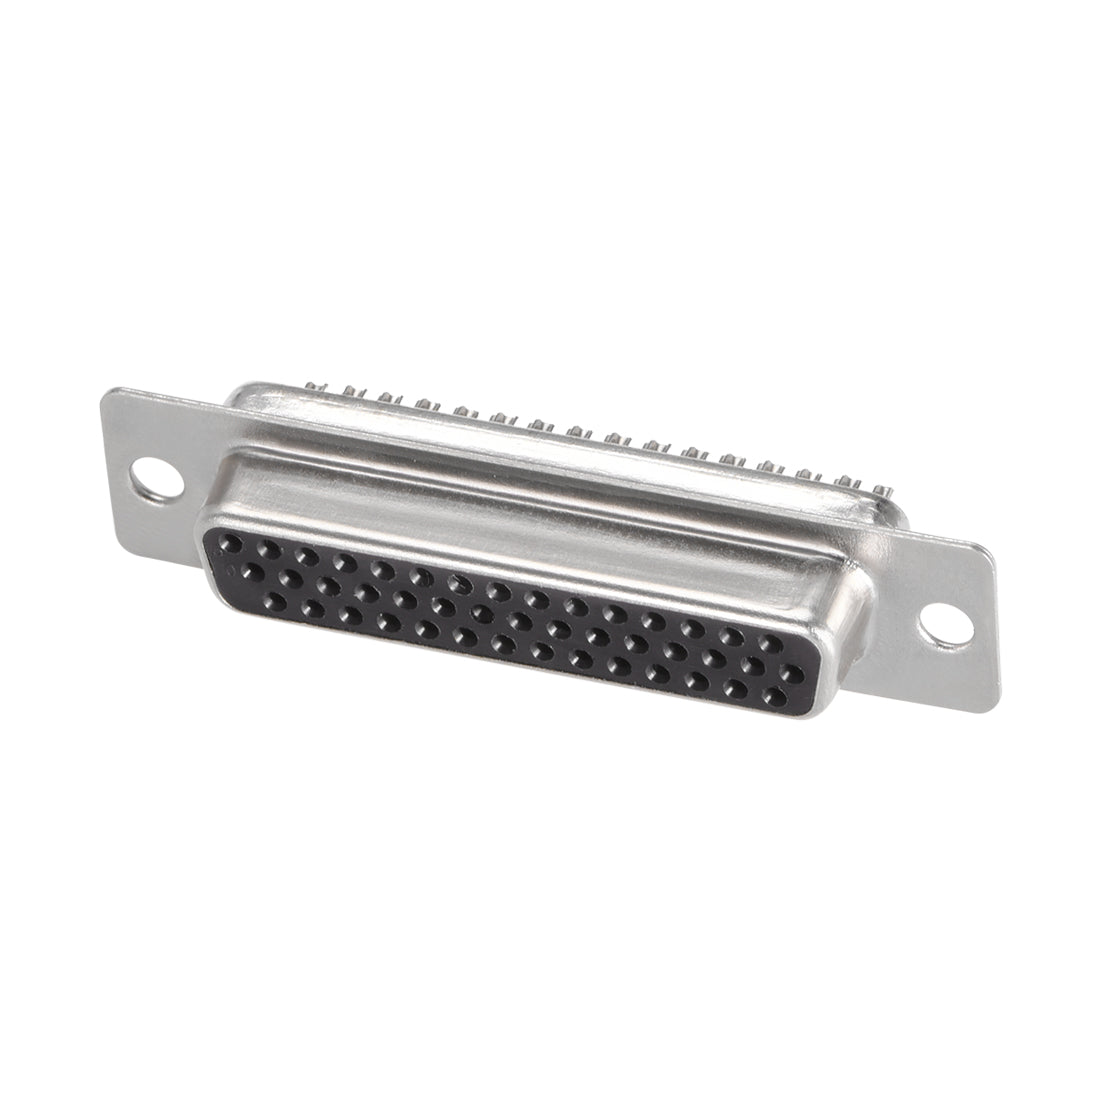 uxcell Uxcell D-sub Connector DB44 Female Socket 44-pin 3-row High Density Port Terminal Breakout for Mechanical Equipment CNC Computers Instrumentation 1pc